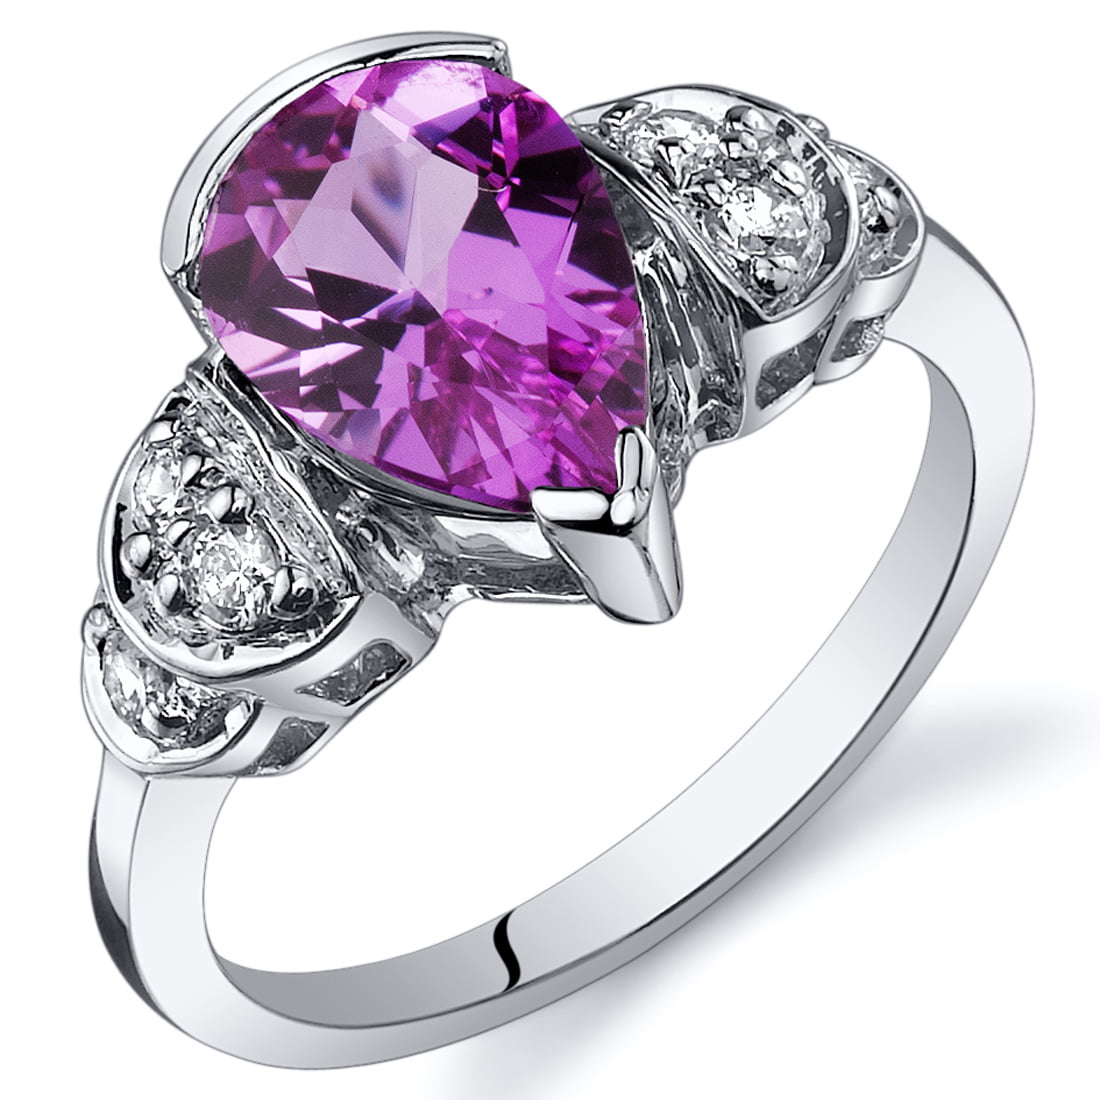 Size 8 Women's Pink Sapphire Crystal Wedding Ring  White Rhodium Plated jewelry 